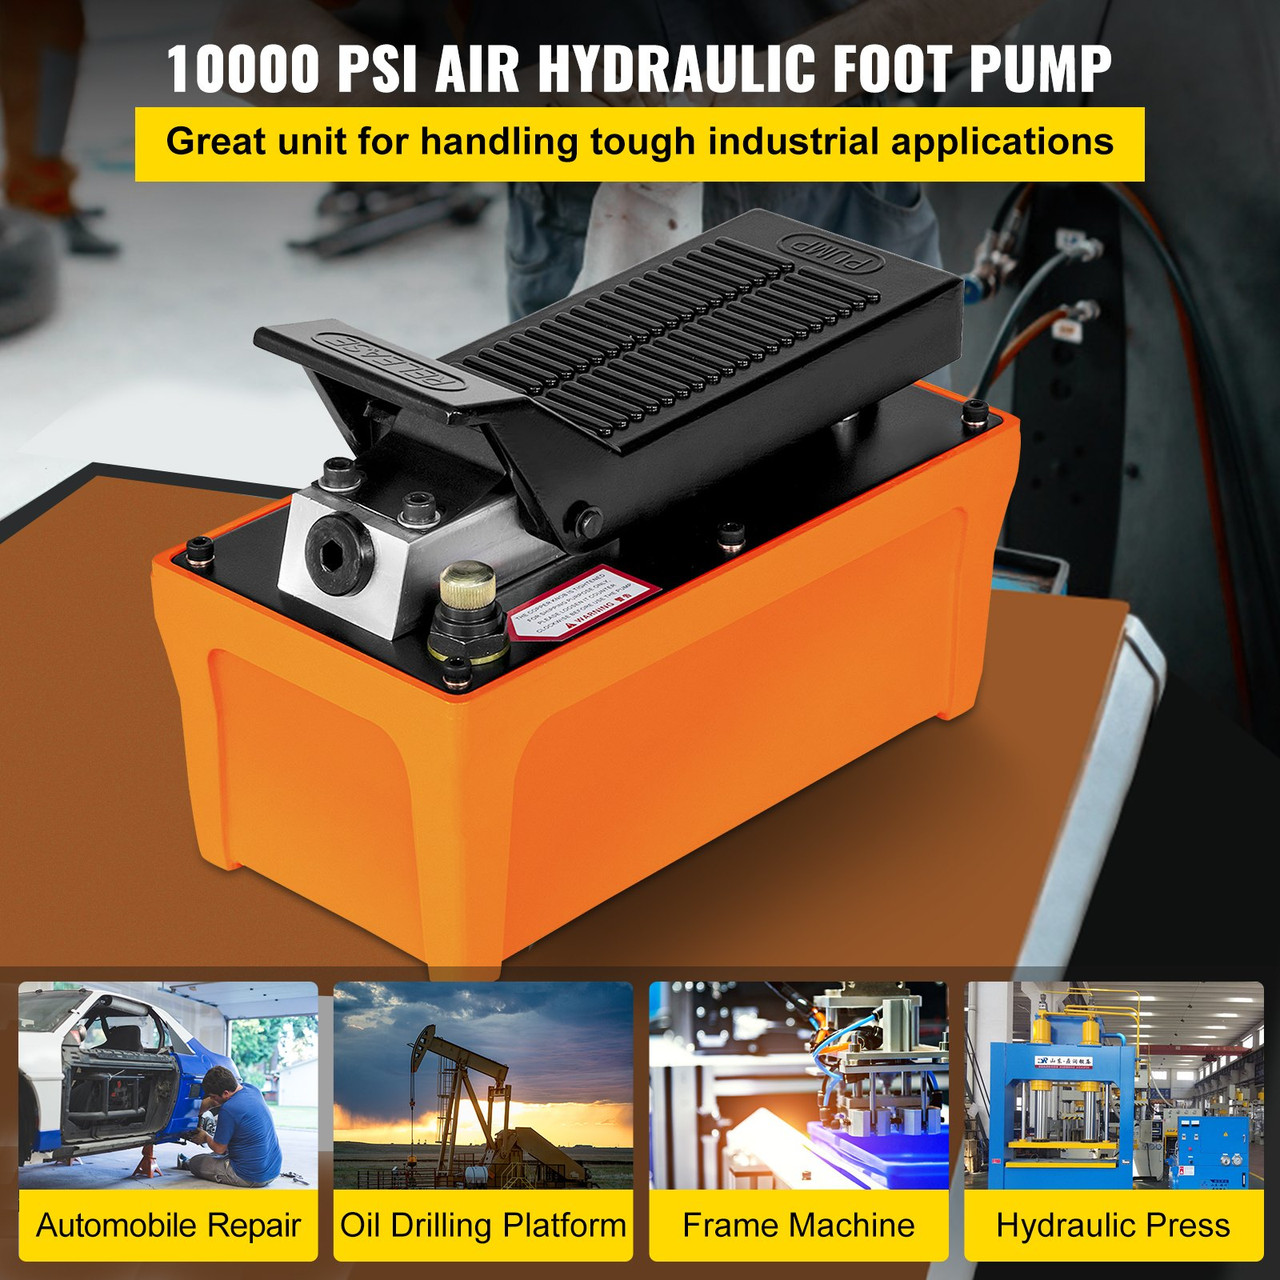 Air Hydraulic Pump 10000 PSI Air Over Hydraulic Pump 1/2 Gal Reservoir Air Treadle Foot Actuated Hydraulic Pump 3/8" NPT with 4.1 ft Hose 2 Connector Single Acting for Car Repair, Orange (Pump Comes Without Oil)